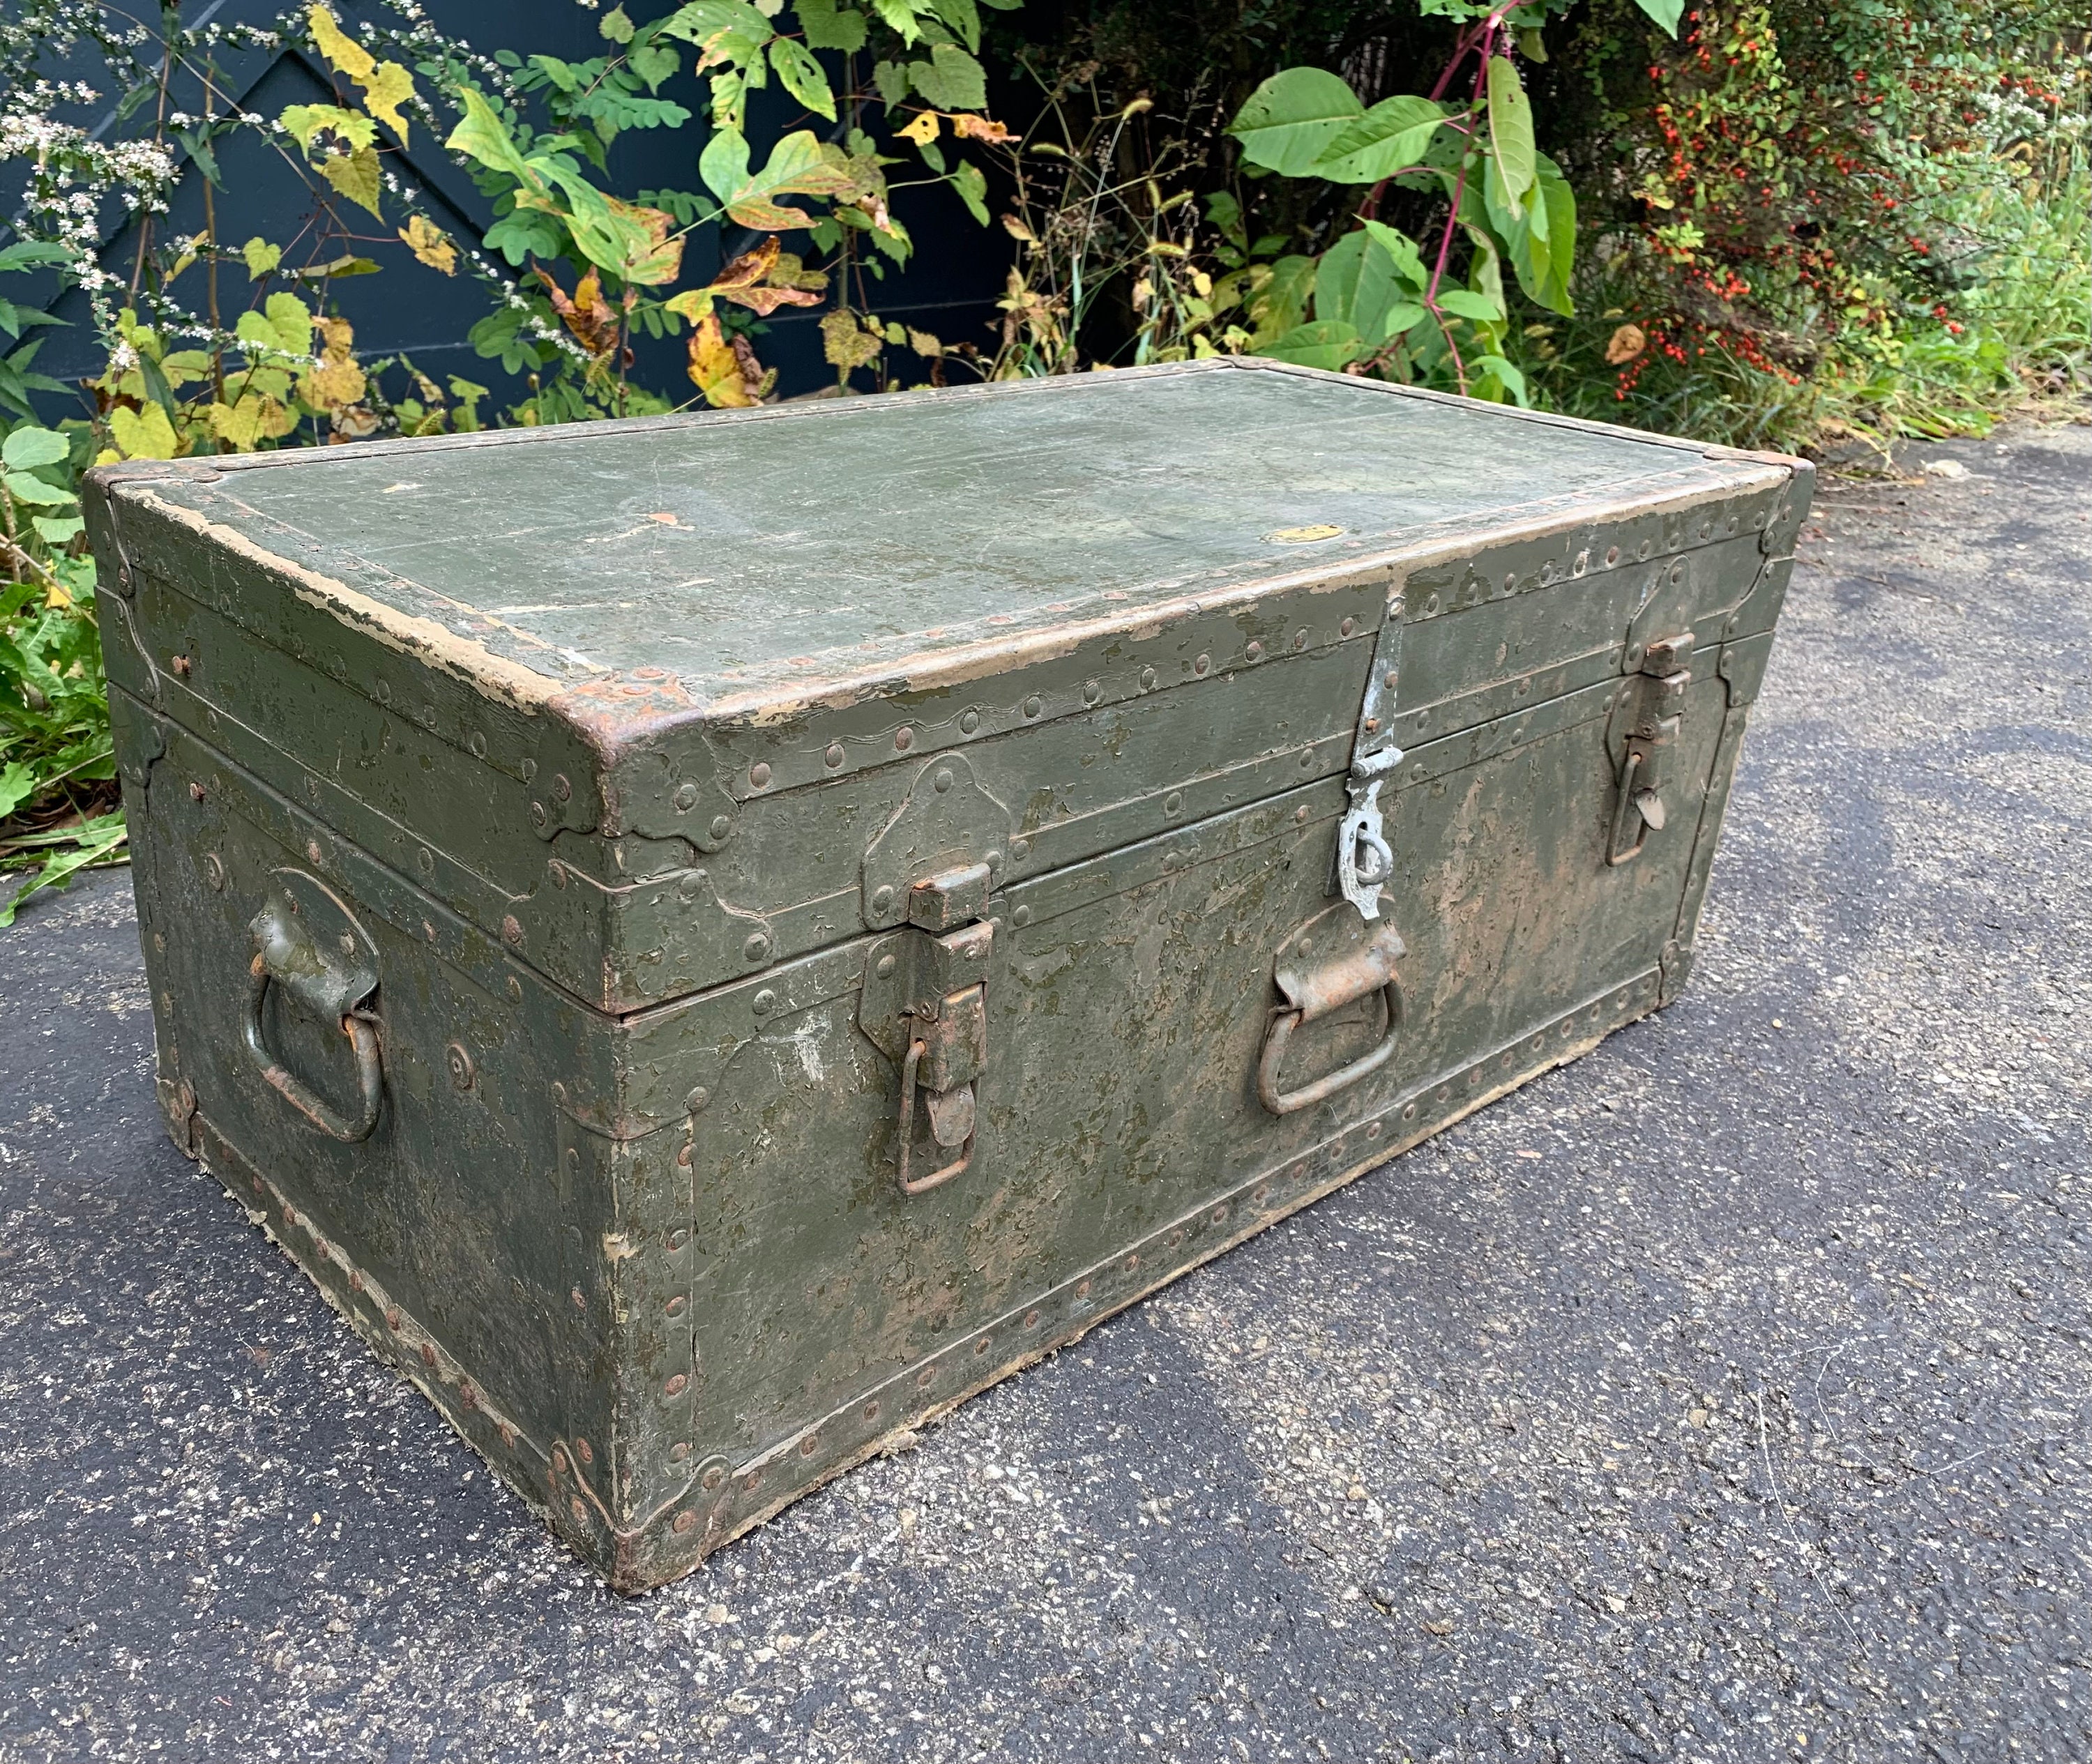 Vintage Military Footlocker West Point Steamer Trunk With 